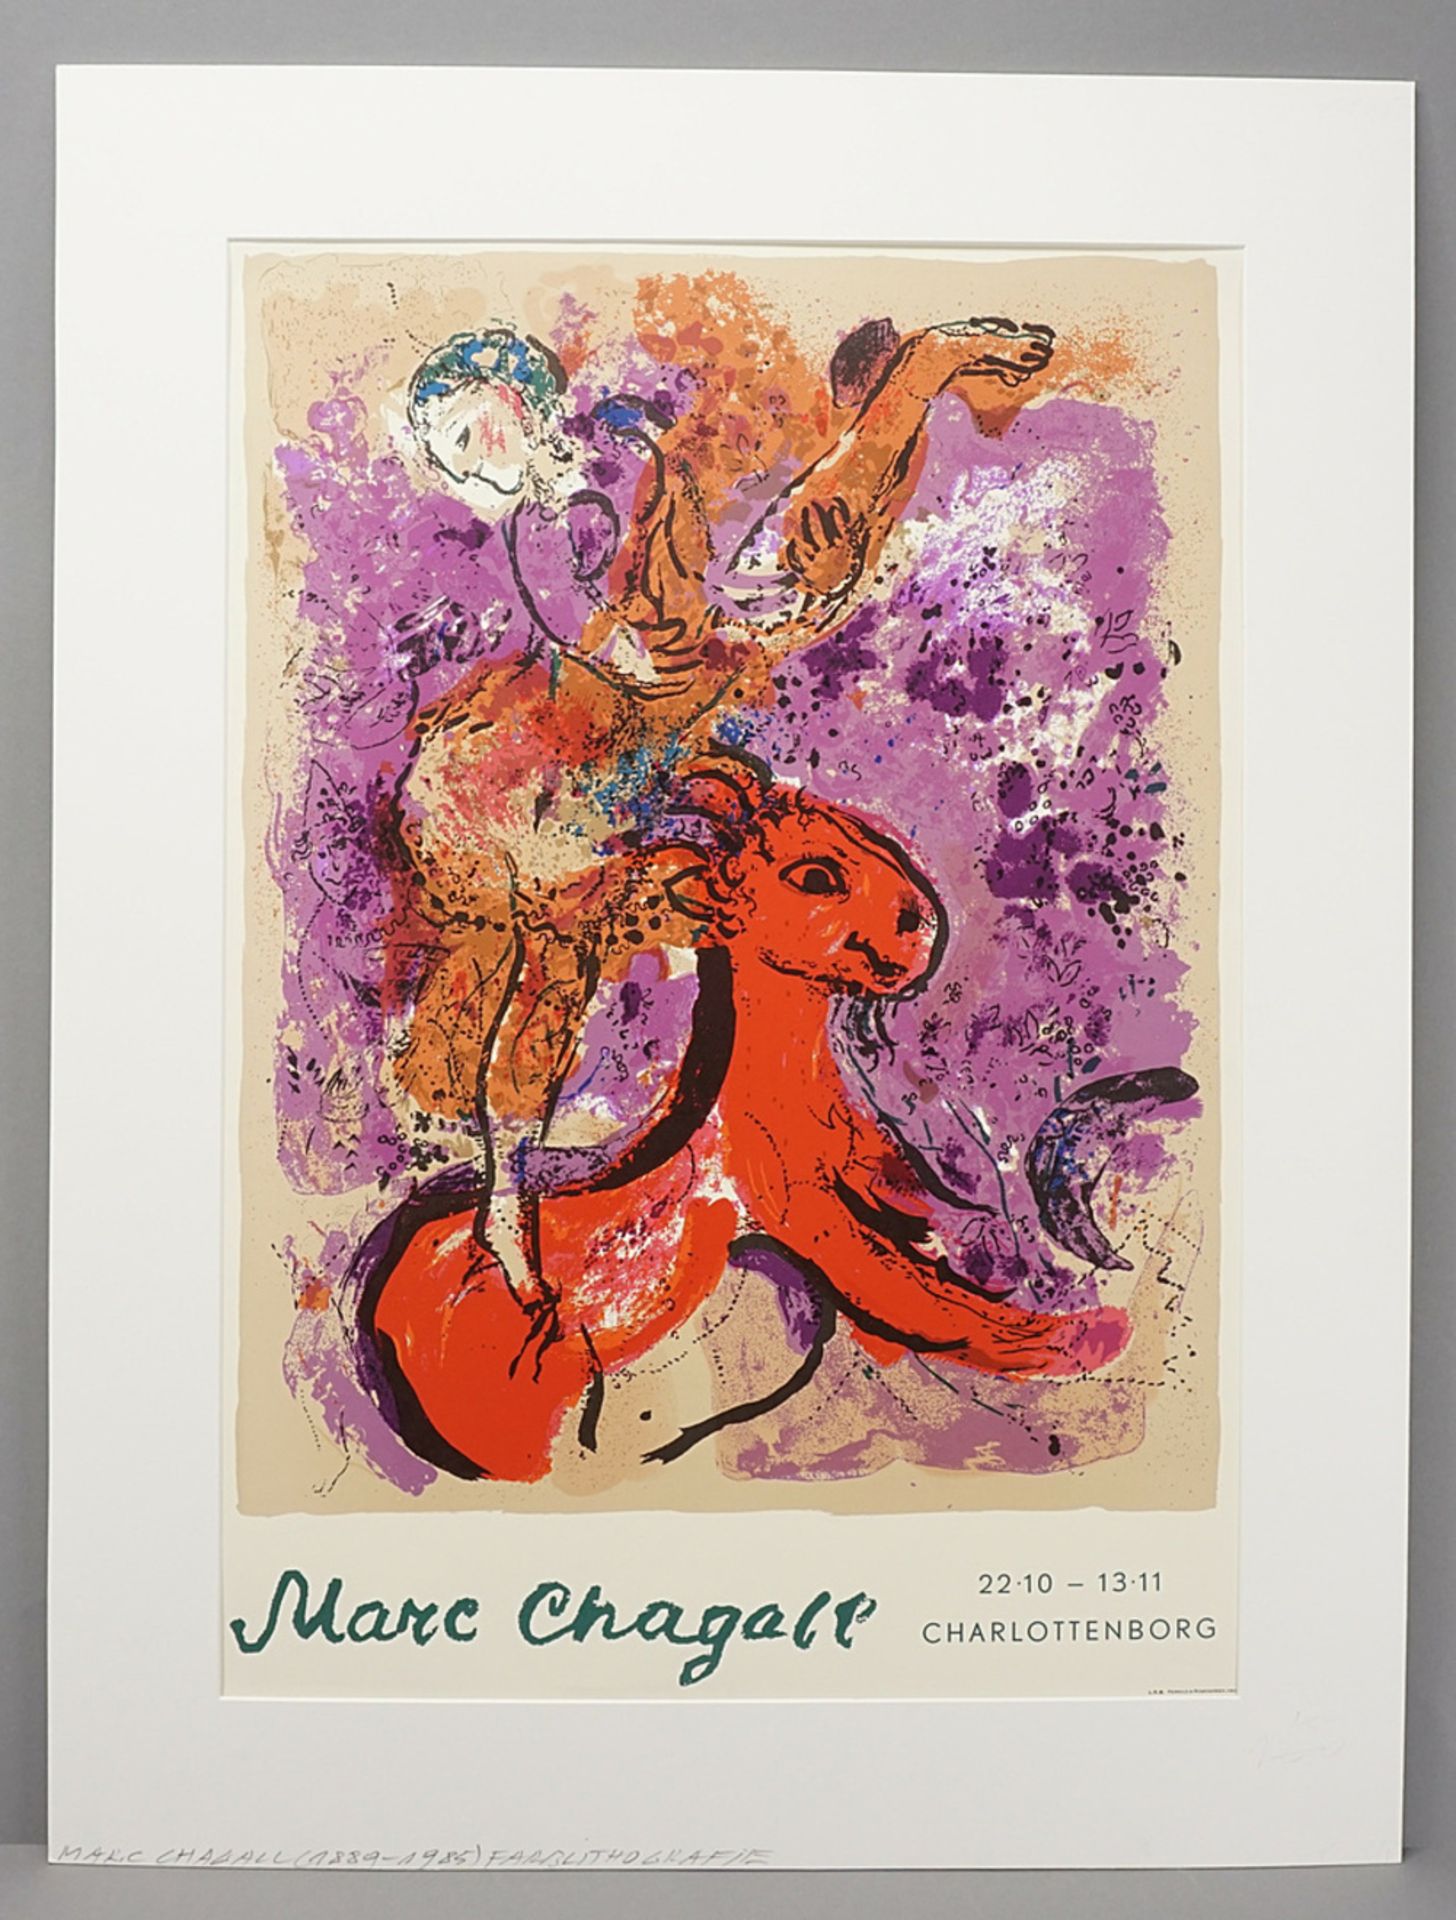 Marc Chagall (1887-1985), Poster for the exhibition at Charlottenborg, Copenhagen, 1960 - Image 2 of 3